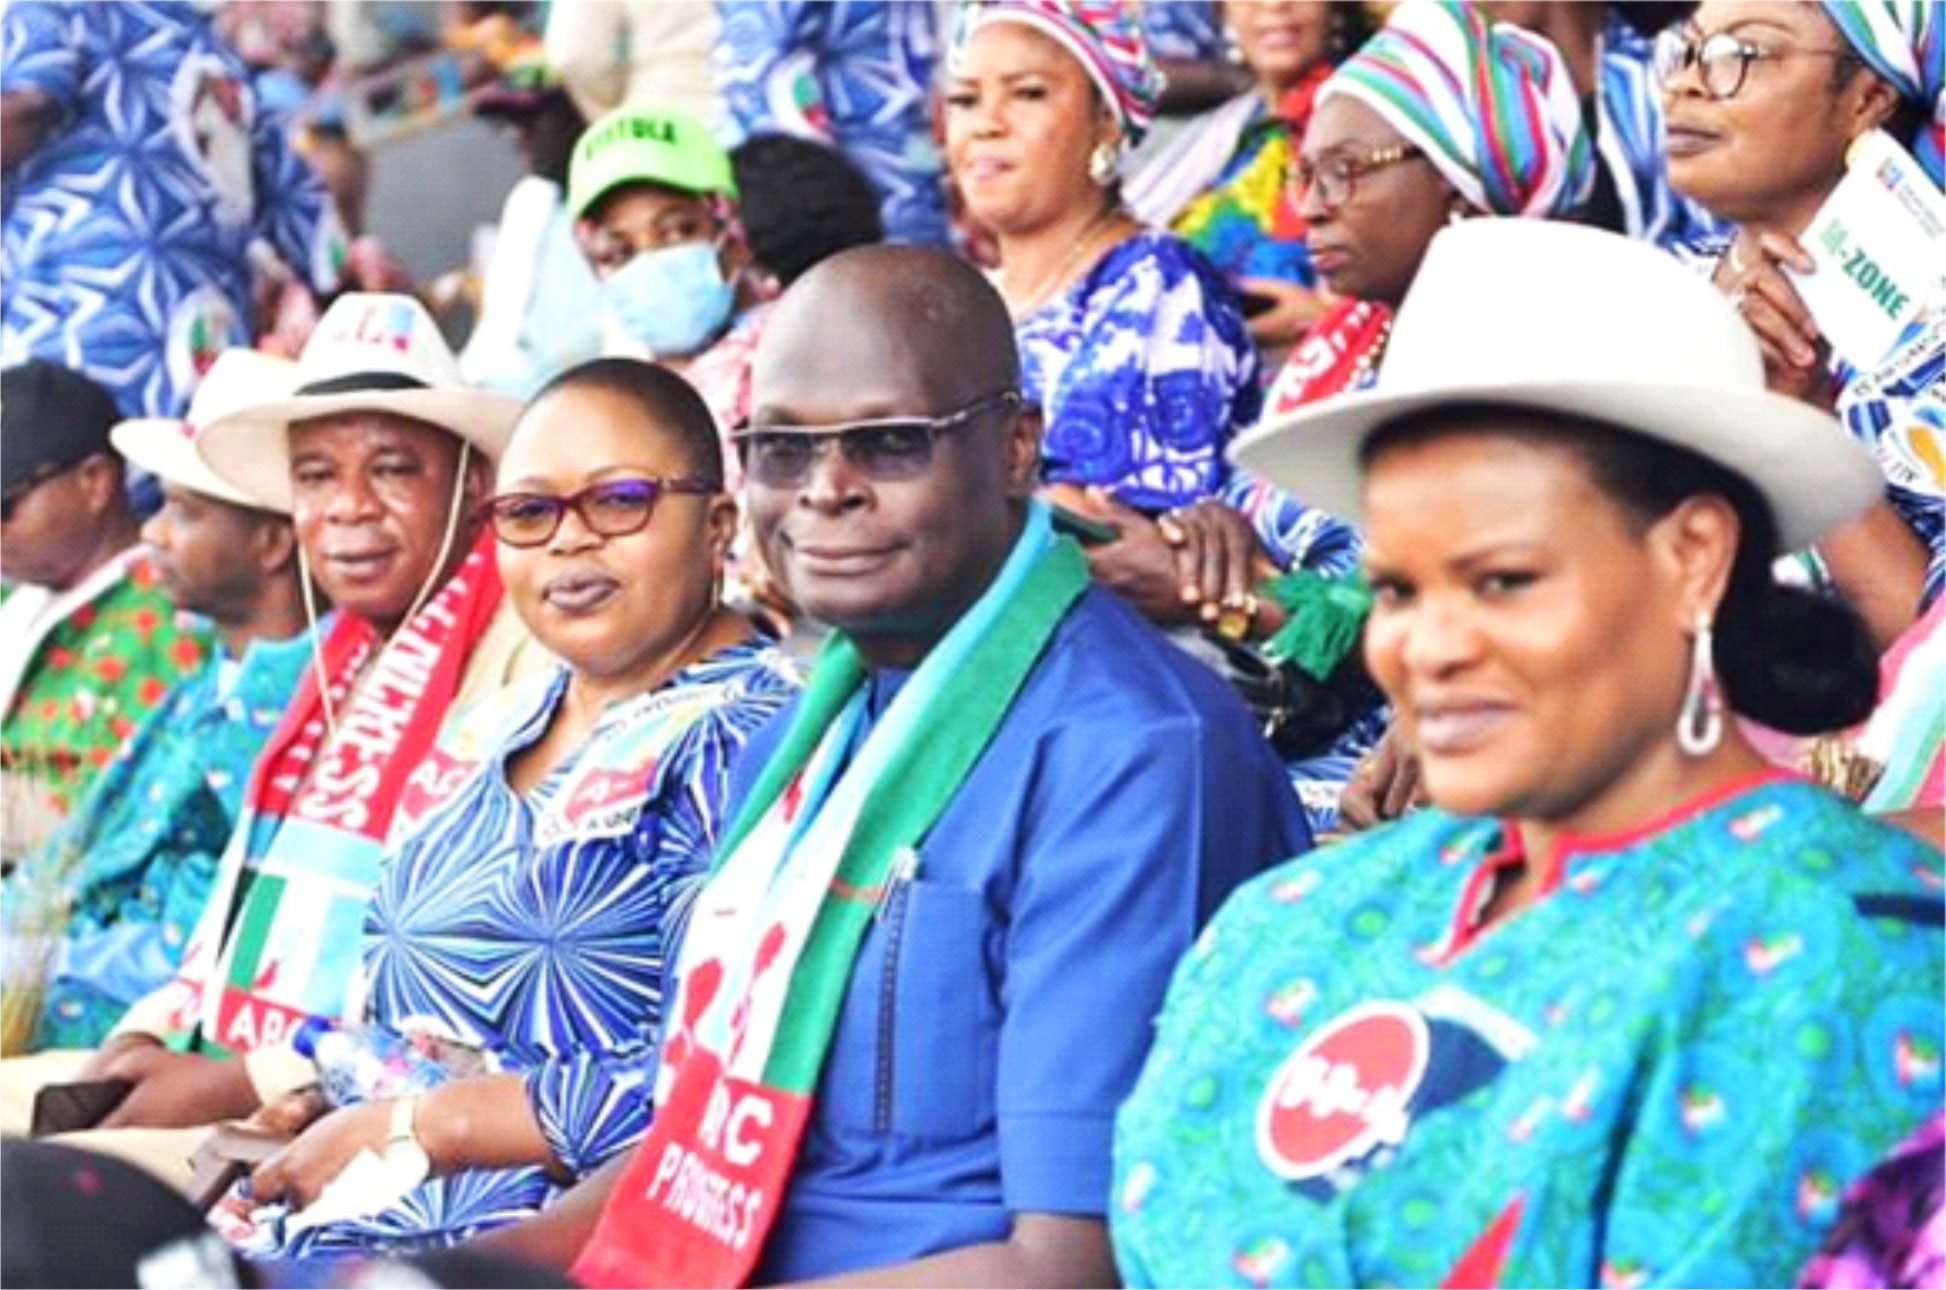 Chief of Staff to Ondo State Governor, Chief Olugbenga Ale (2ndR) and other Chieftains of the All Progressives Congress (APC), at the Mega Rally of reelection of Osun State Governor, Mr Gboyega Oyetola, held at the Osogbo stadium, Osun State... yesterday.